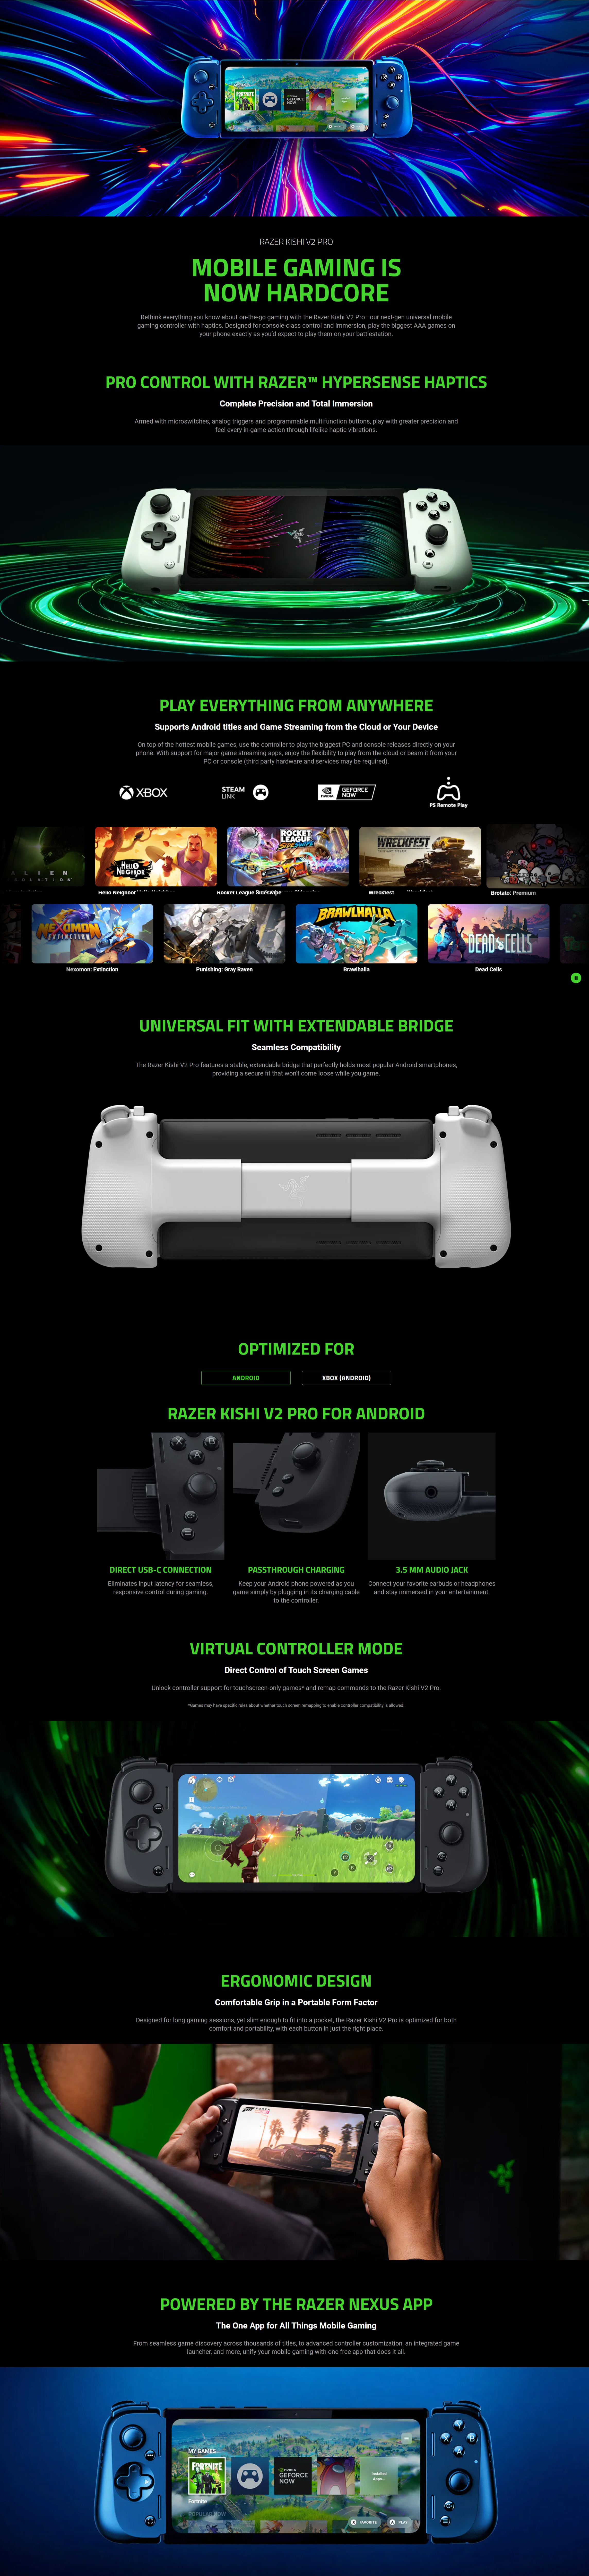 A large marketing image providing additional information about the product Razer Kishi V2 Pro - Gaming Controller for Android - Additional alt info not provided